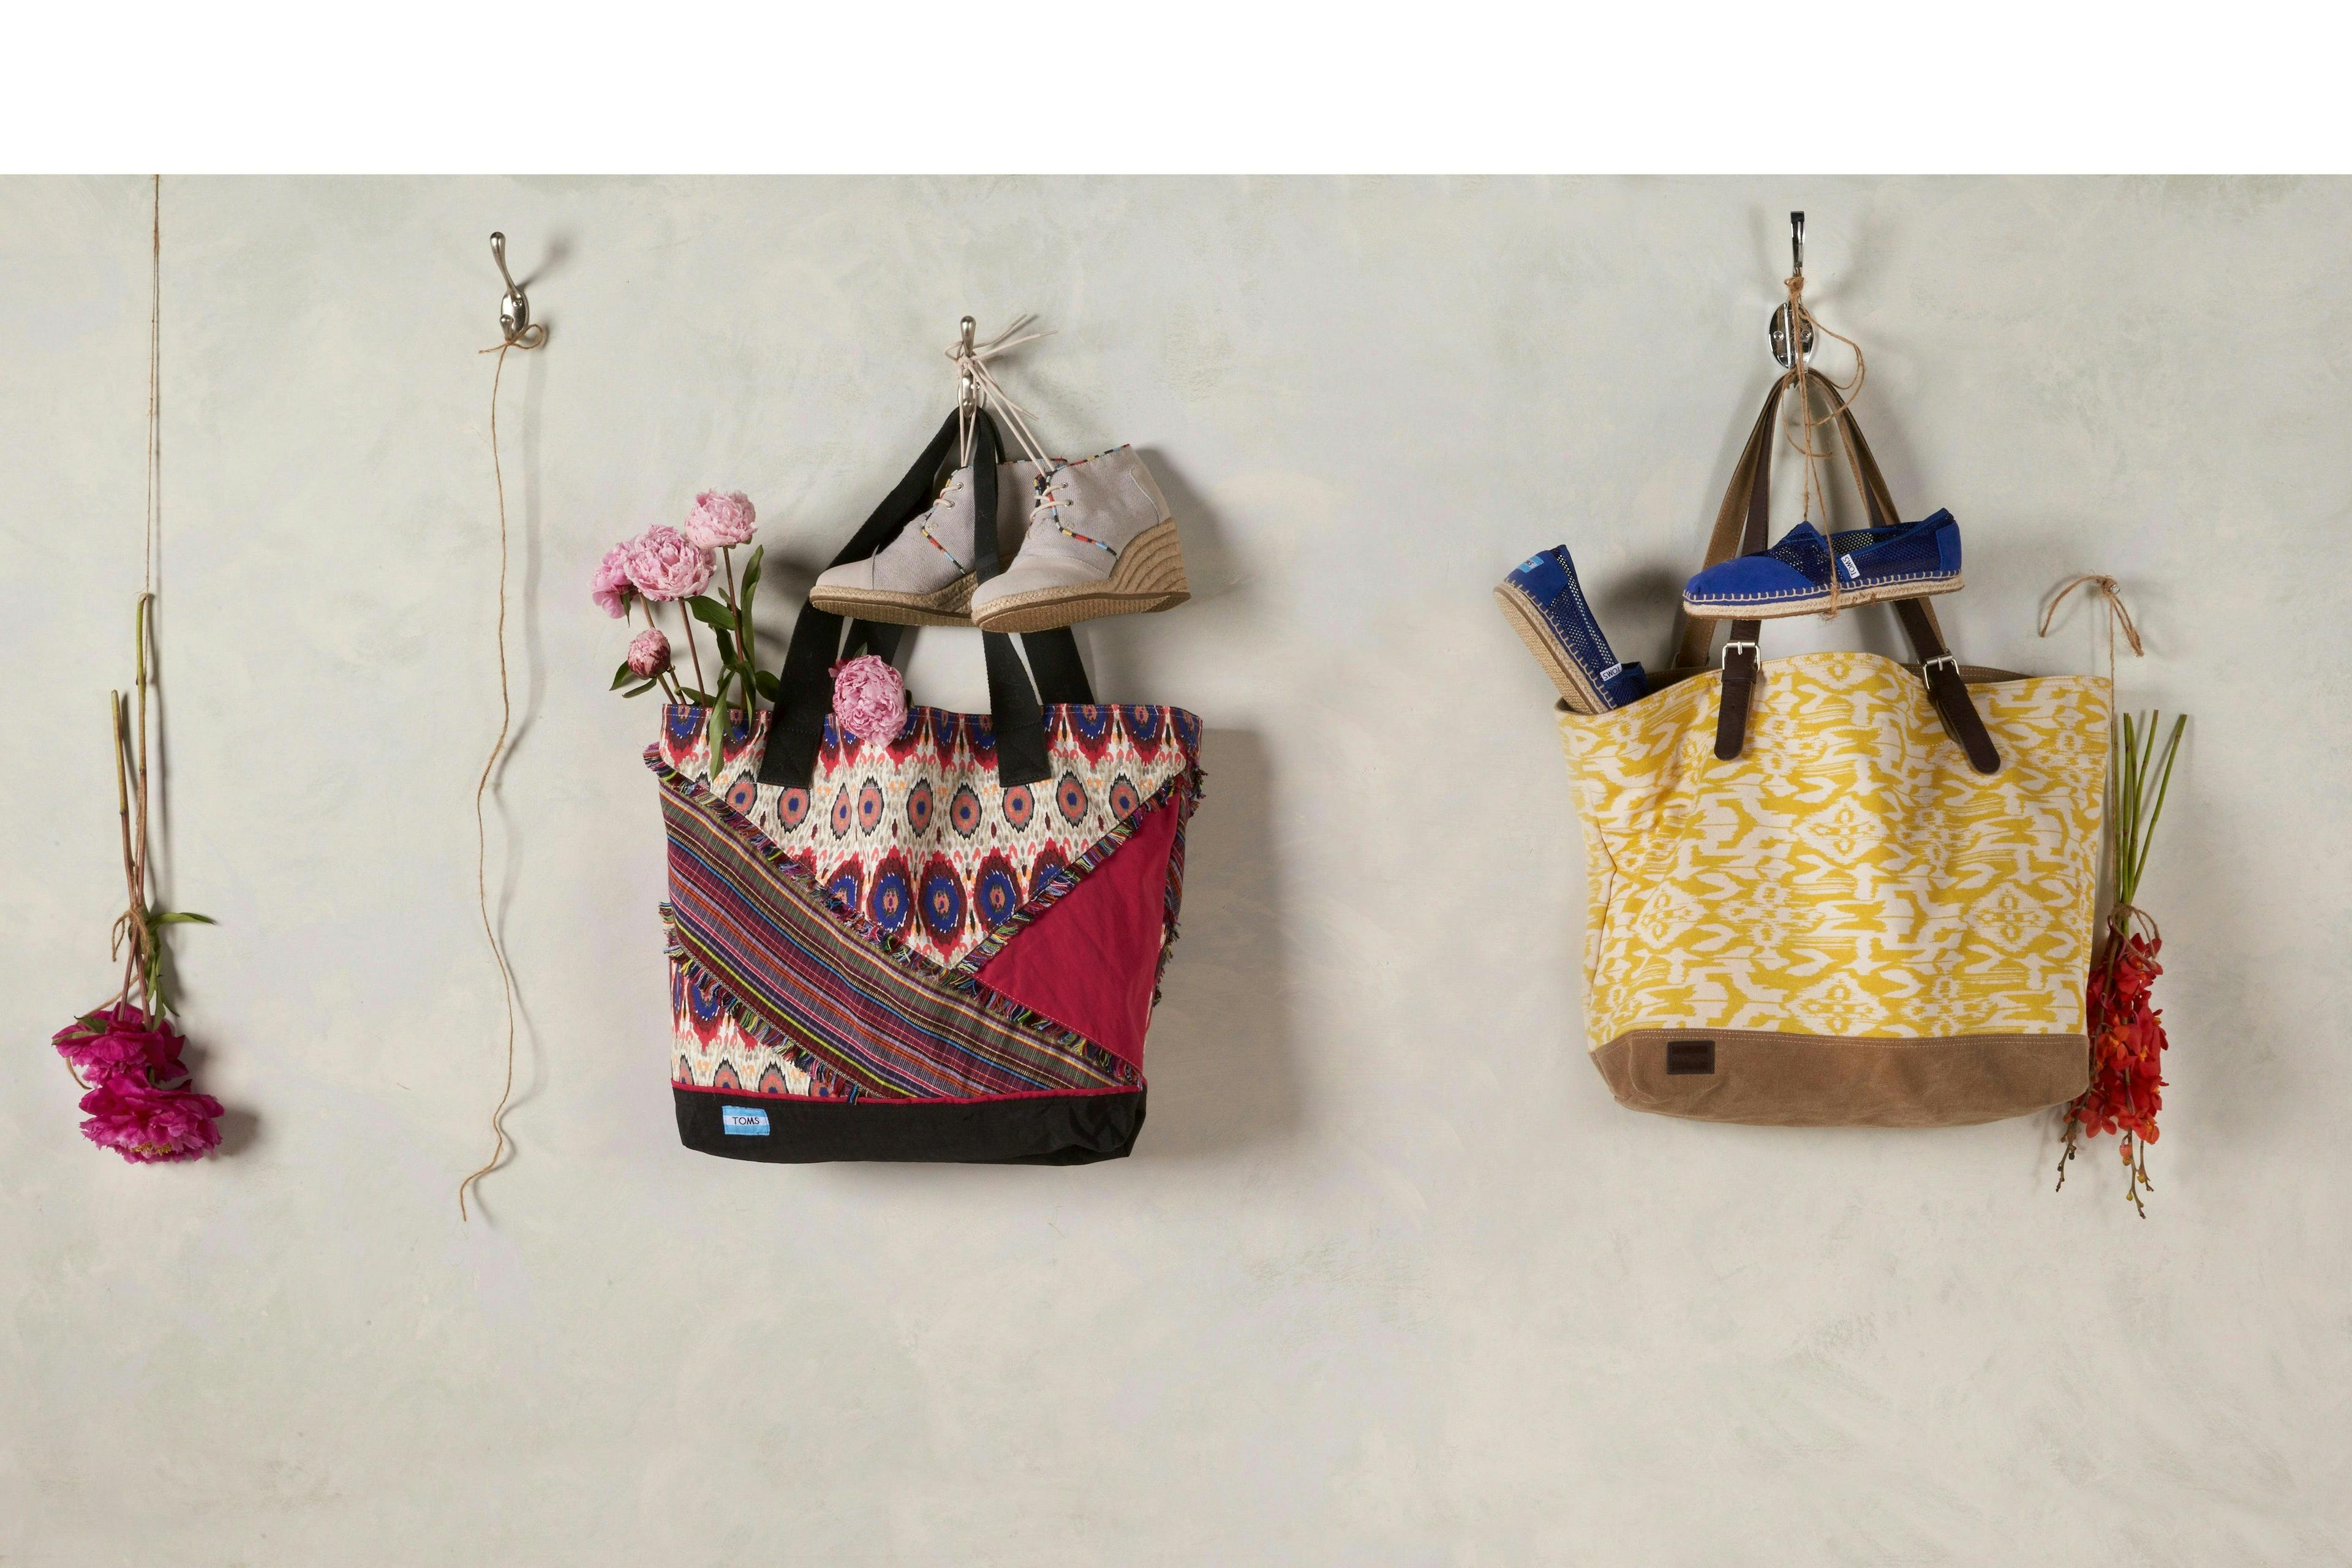 flat lay photography - colorful bags and toms shows hanging from string beside a rose